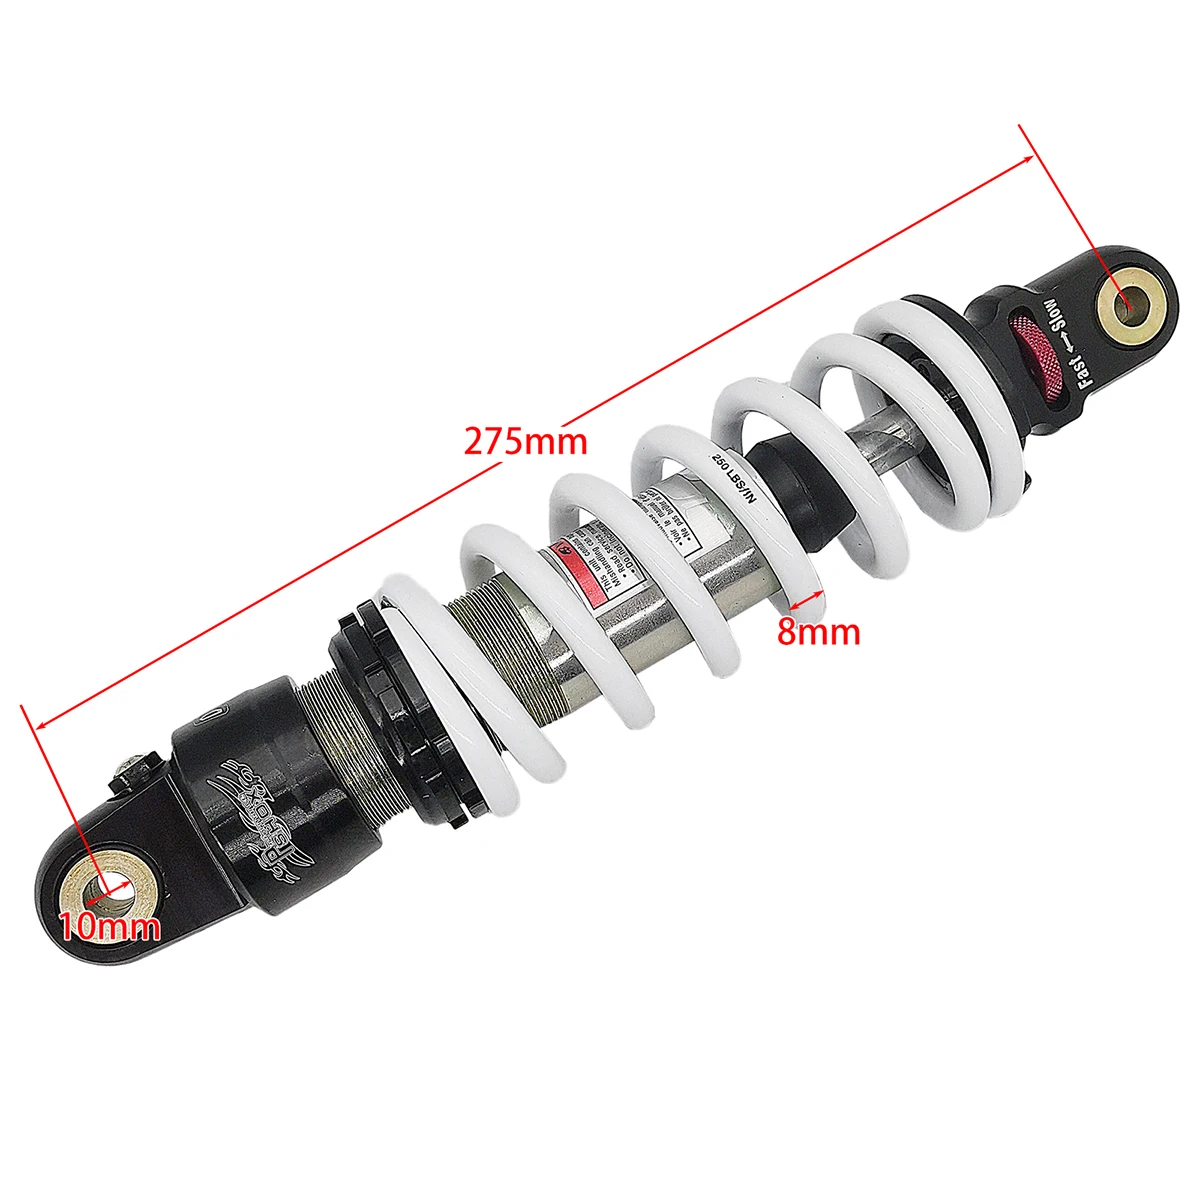 

275mm Motorcycle Rear Shock 275 Absorber Damping Adjustable Dirt Pit Bike After The Shock for BSE T8 Kayo CRF KLX YZF